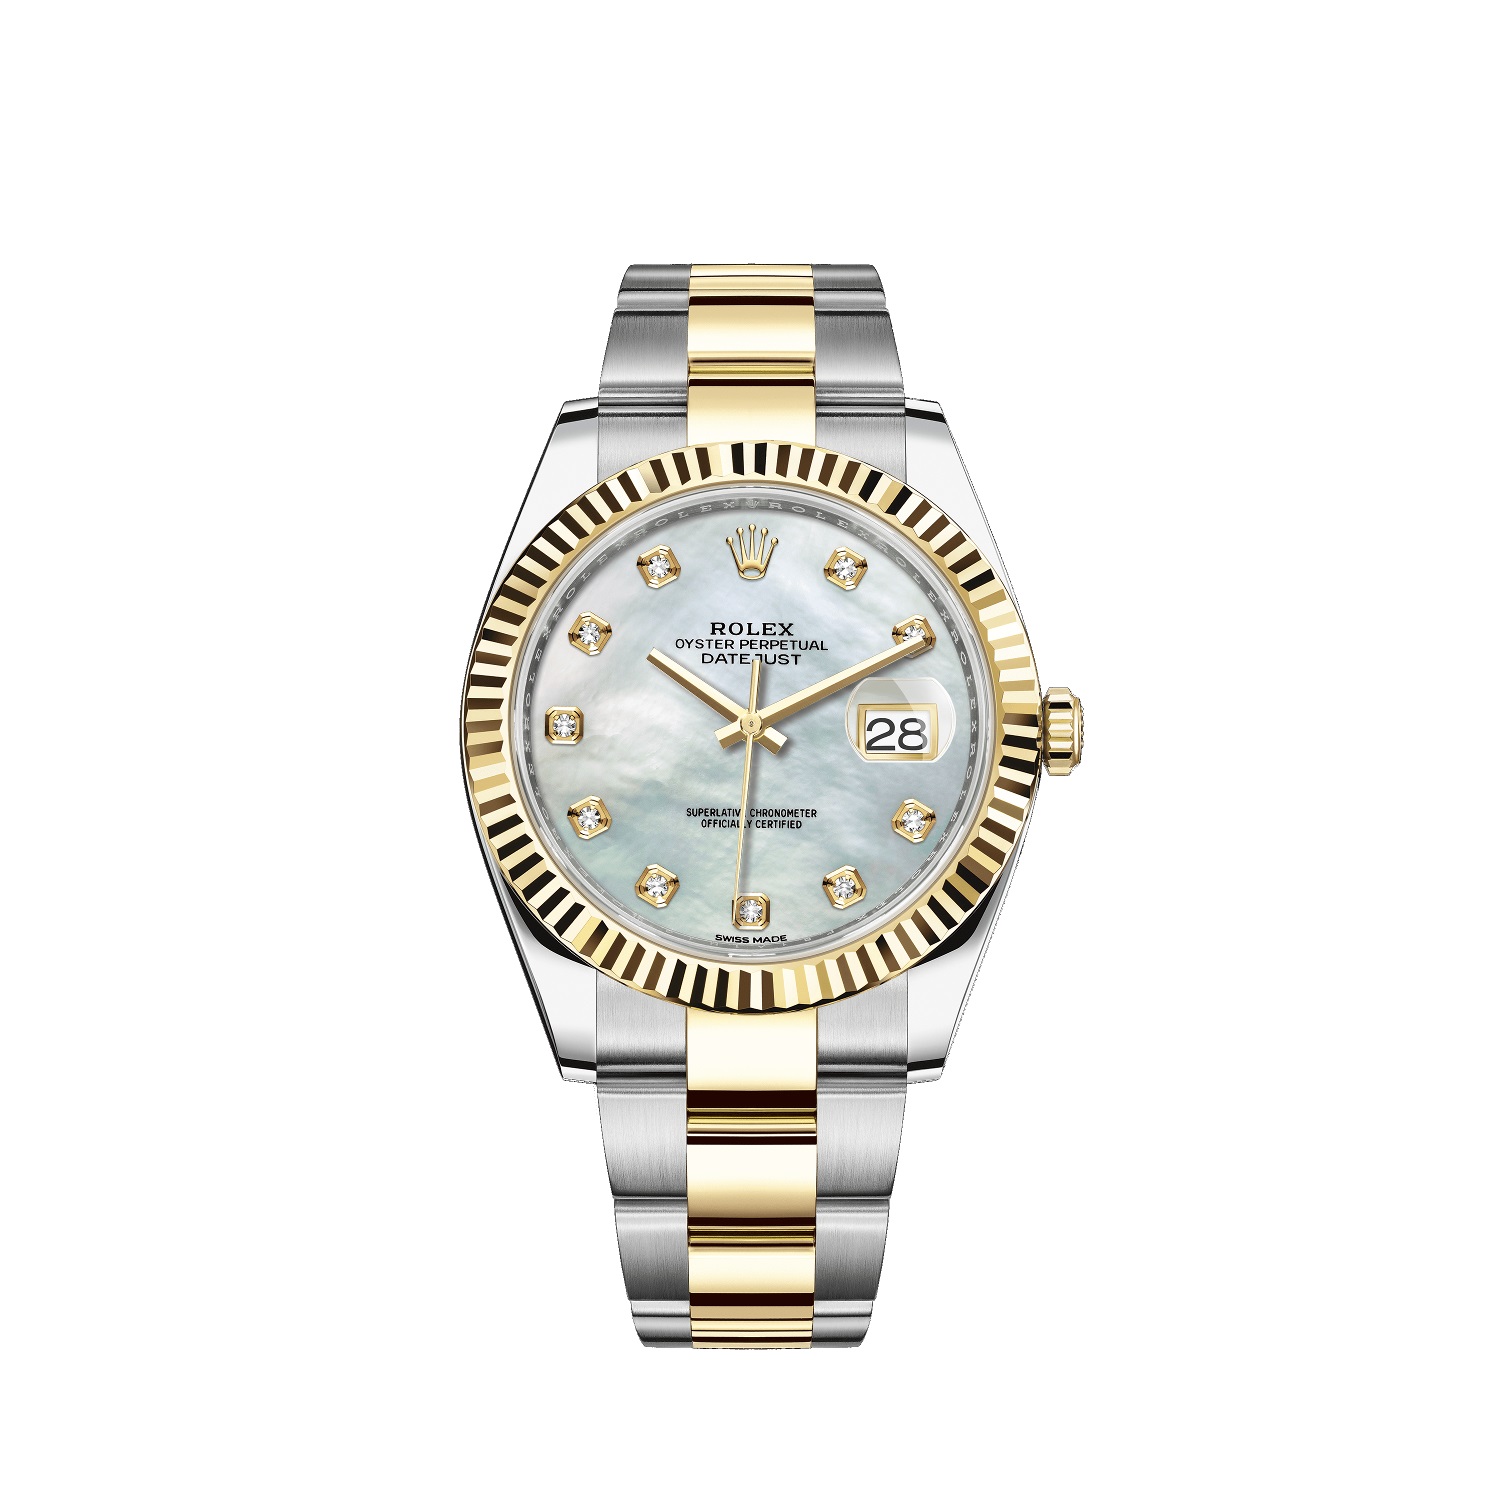 Datejust 41 126333 Gold & Stainless Steel Watch (White Mother-of-Pearl Set with Diamonds)